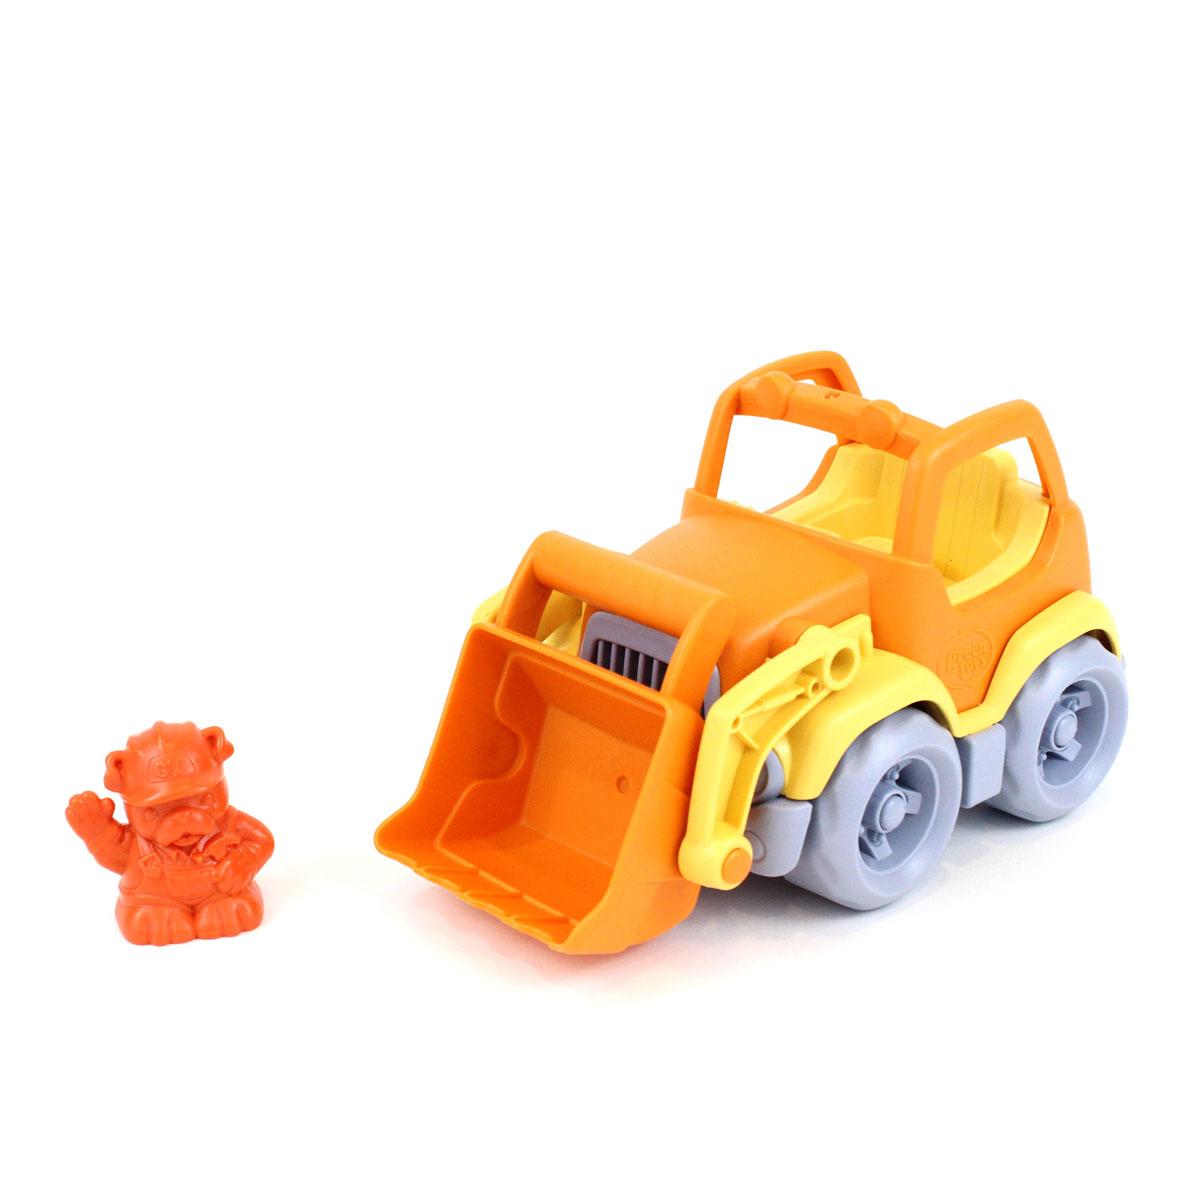 Child's toy scooper with red figure.